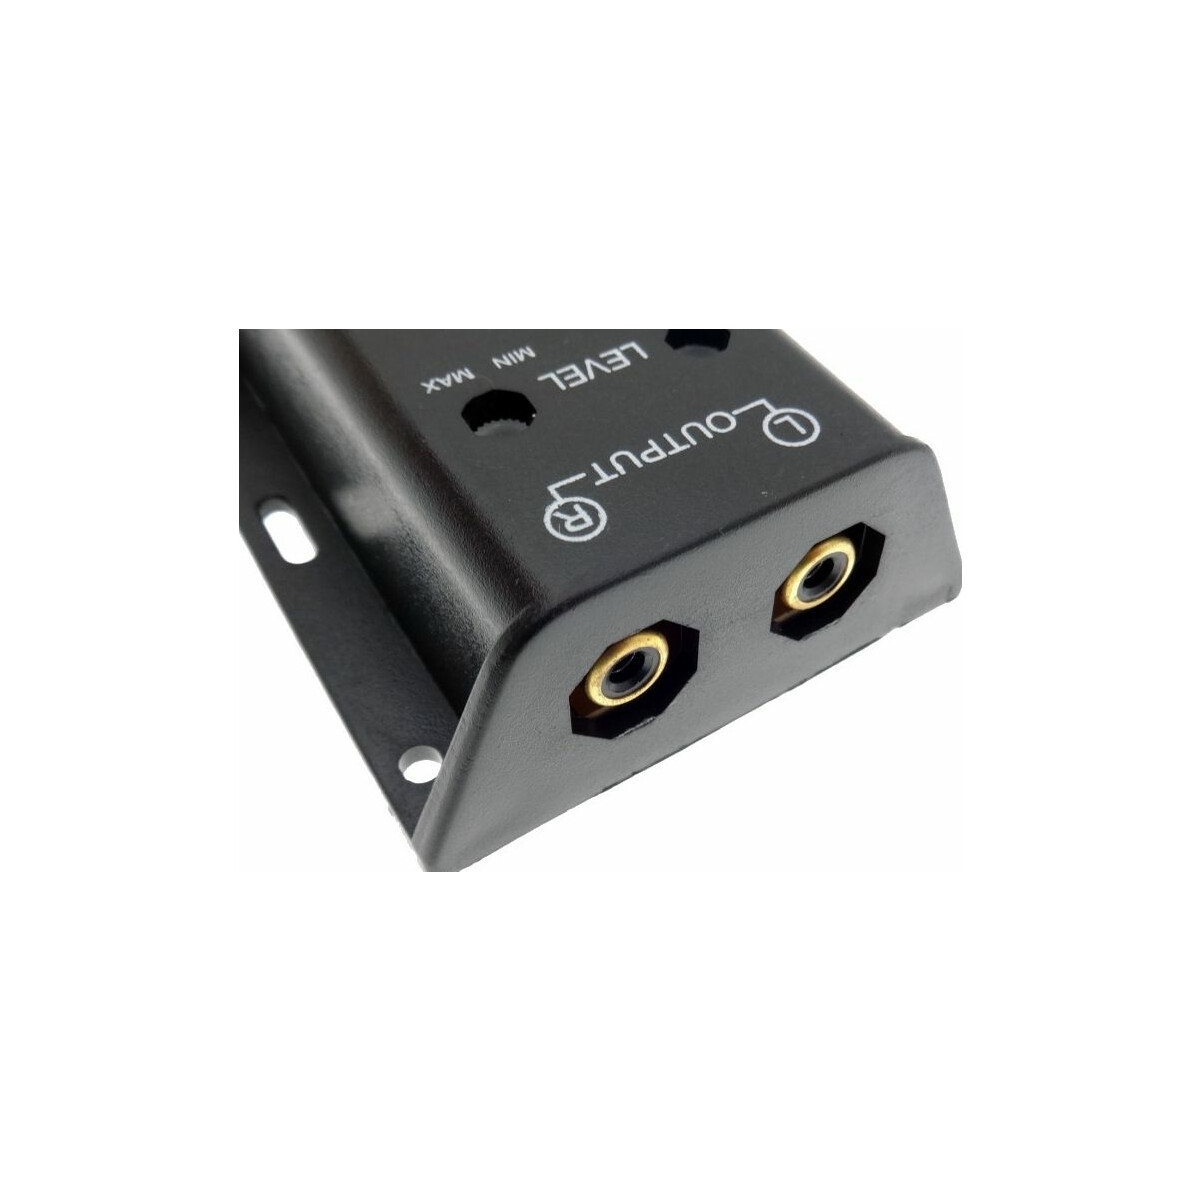 Audioproject A111 High Low Adapter Converter für Endstufe hi Level